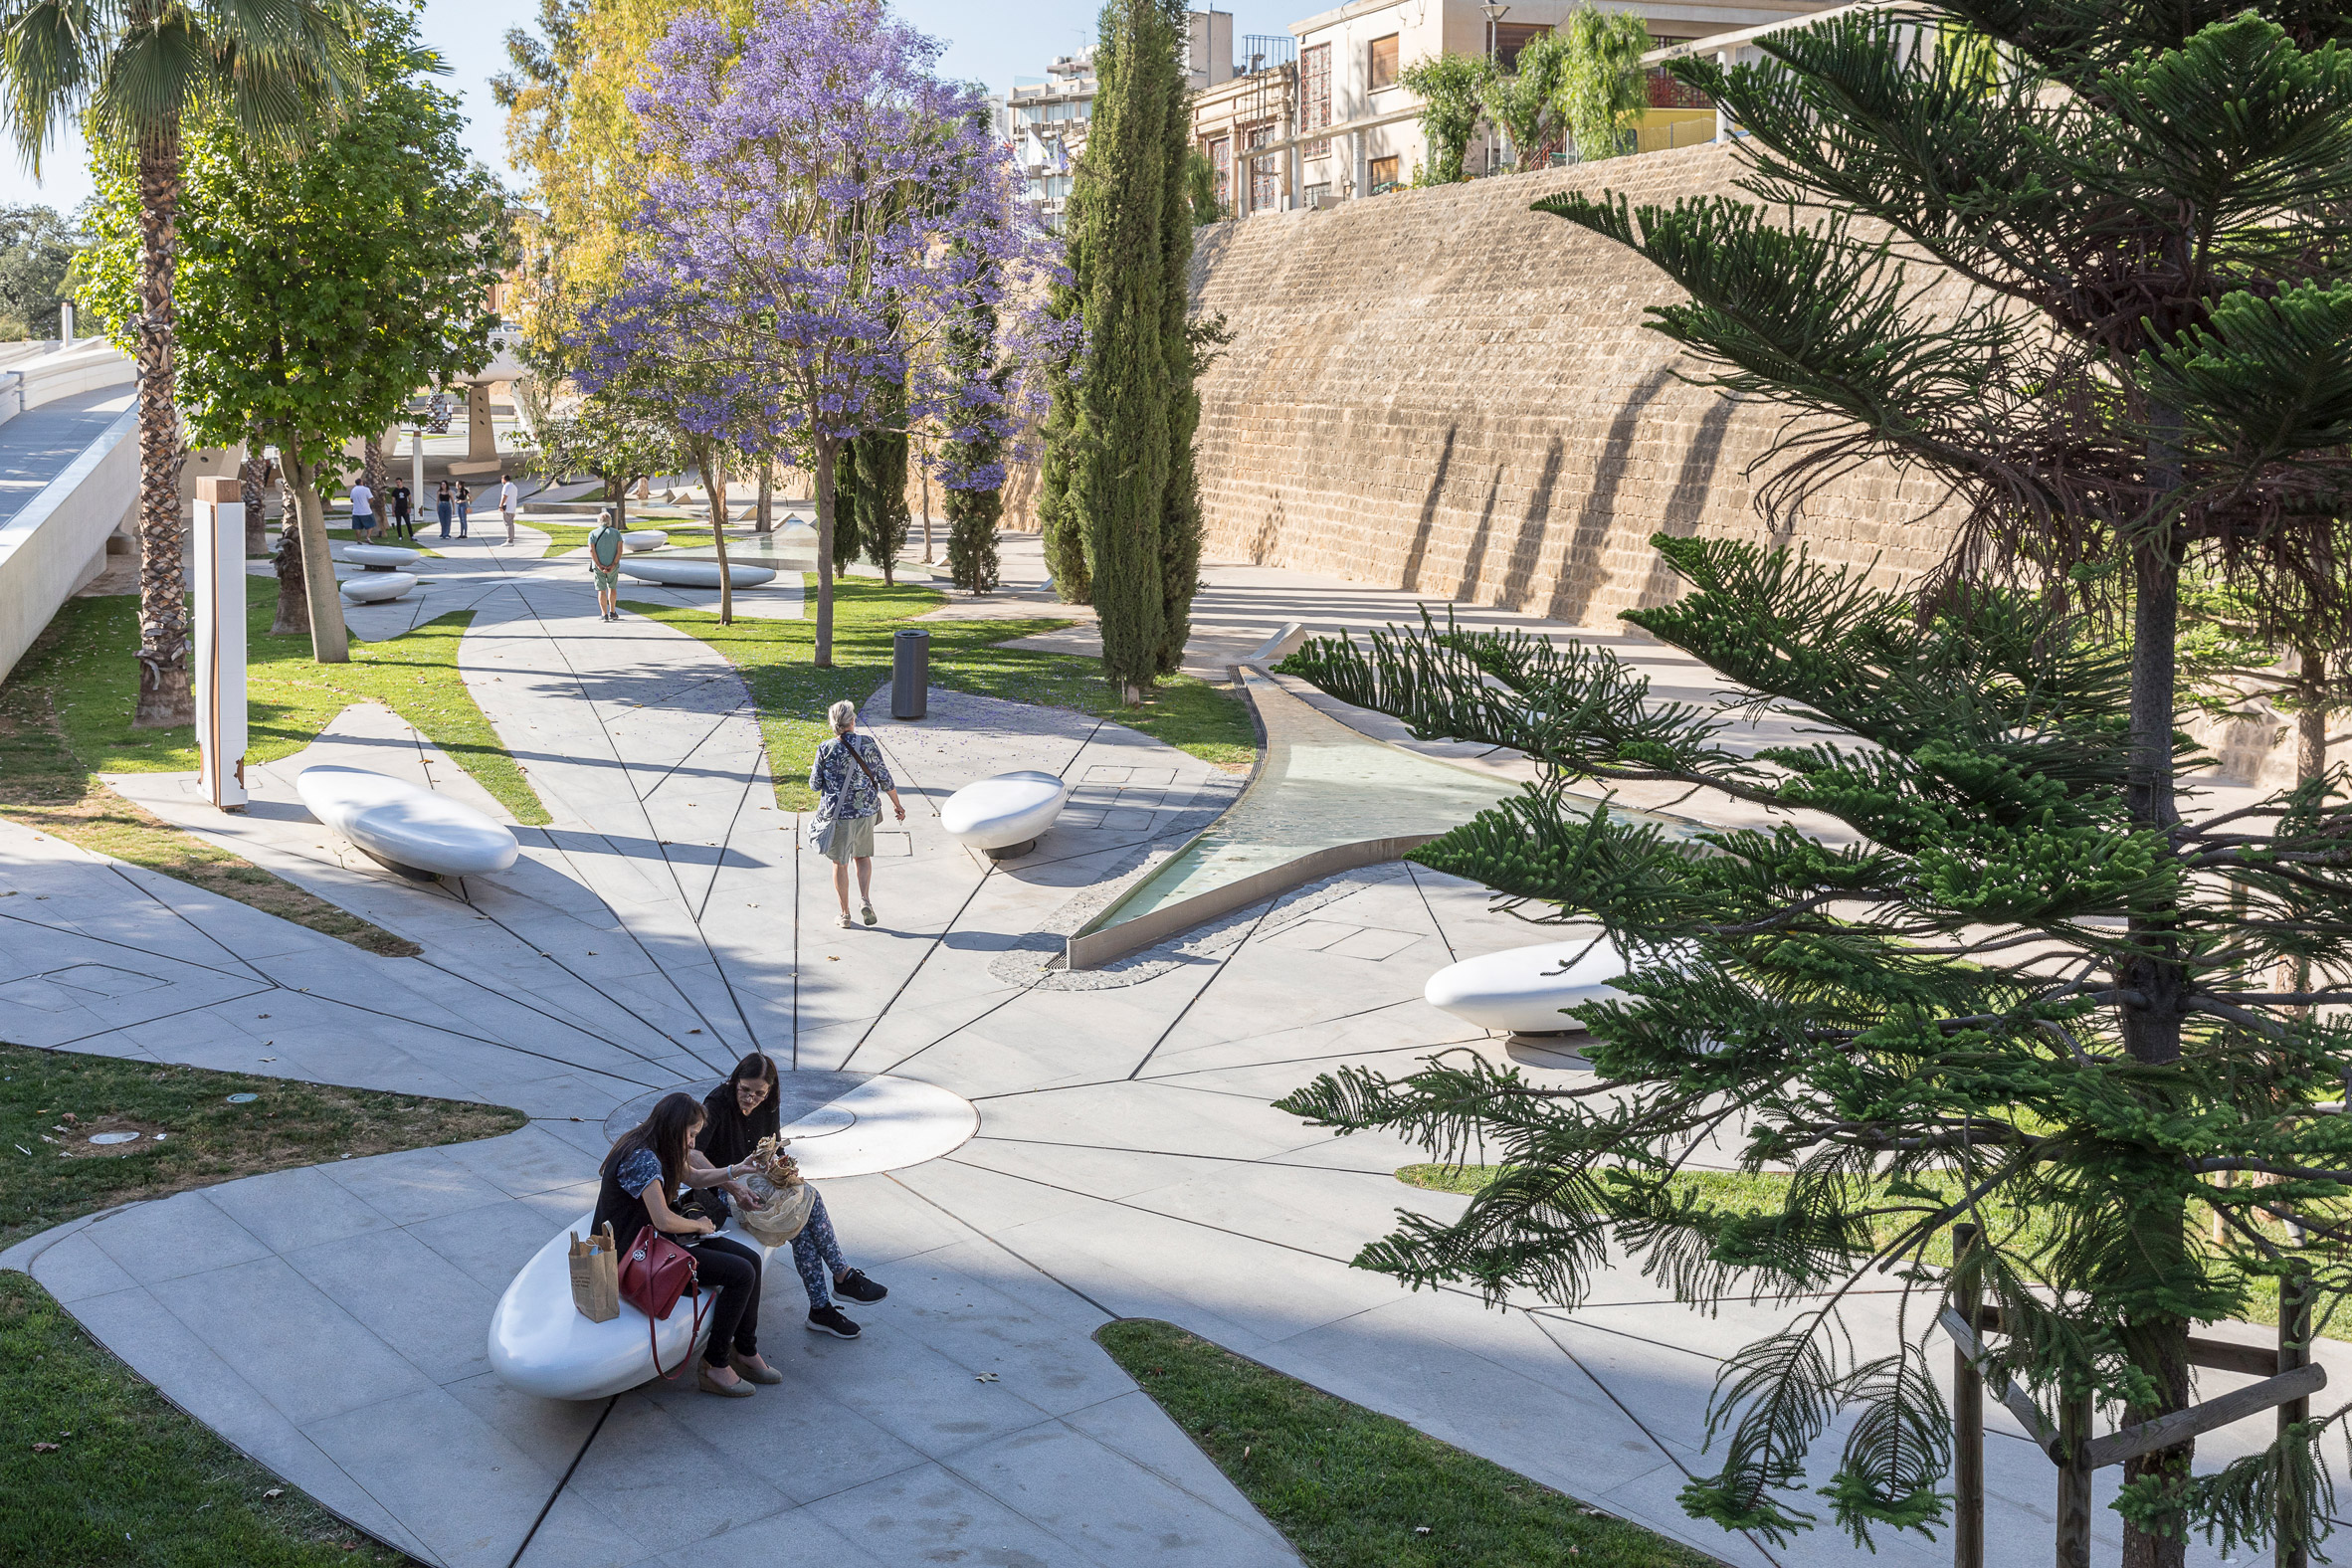 Gathering space in Eleftheria Square by Zaha Hadid Architects